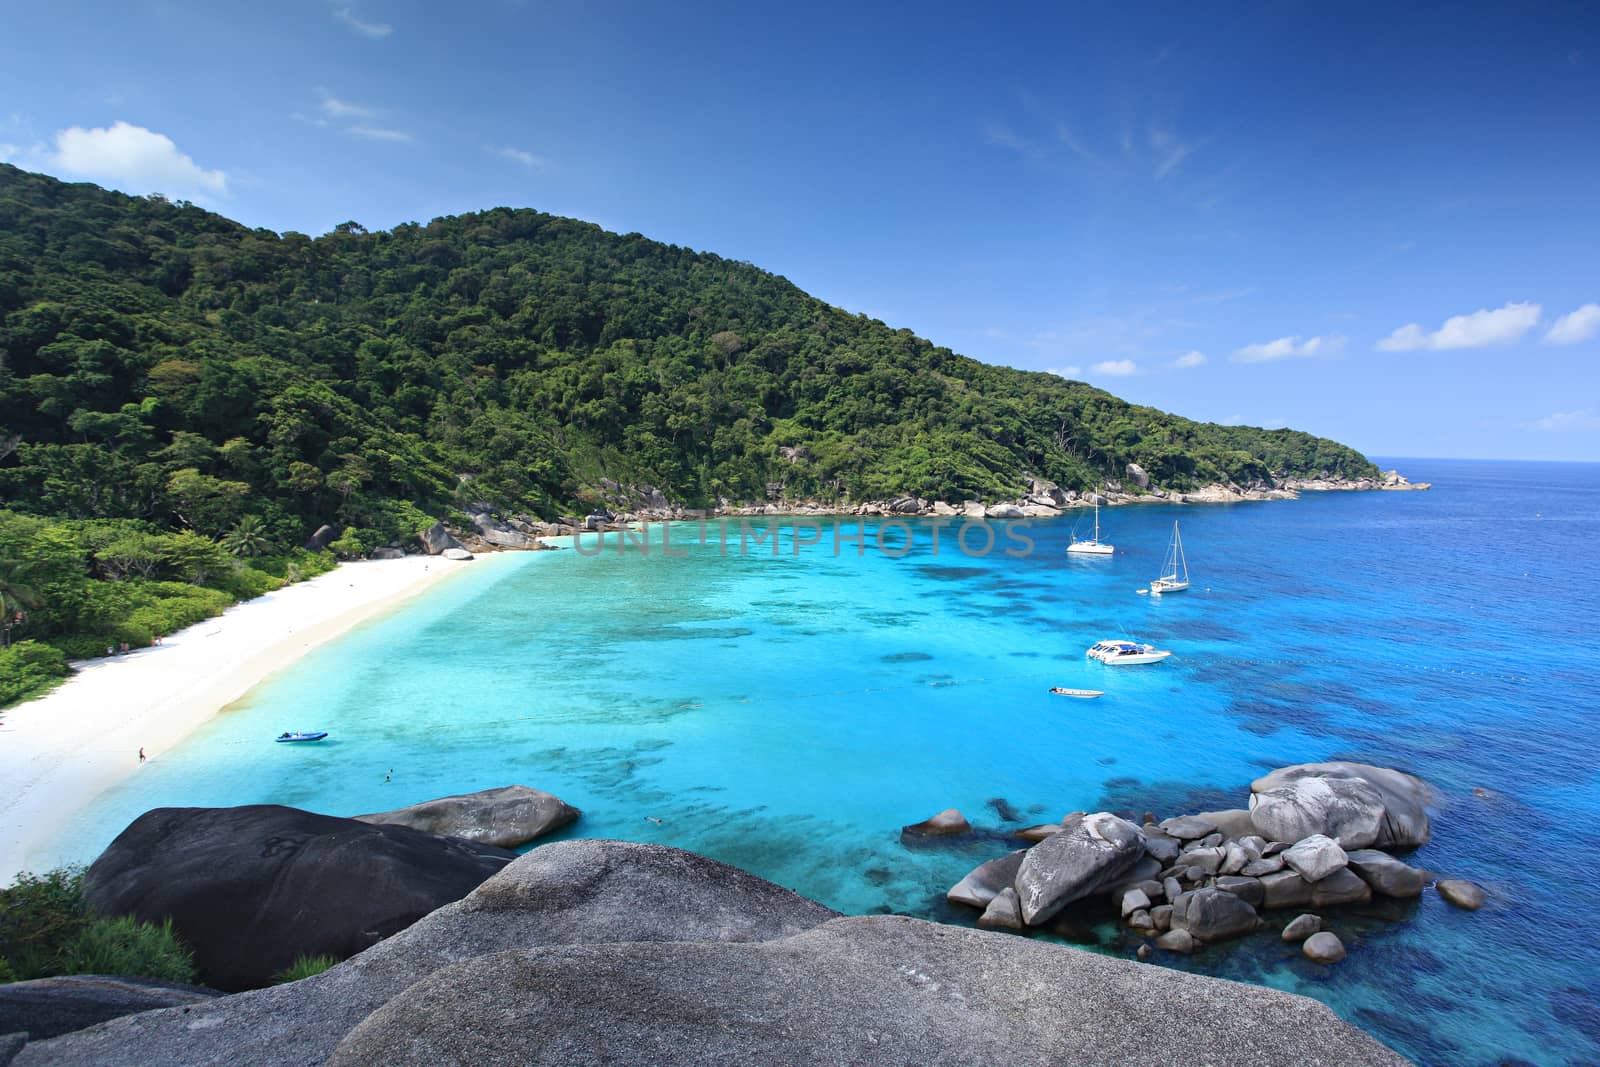 Panoramic view with blue sky and clouds on Similan island No.8 at Similan national park. Phuket, Thailand. View from the sailing rock viewpoint